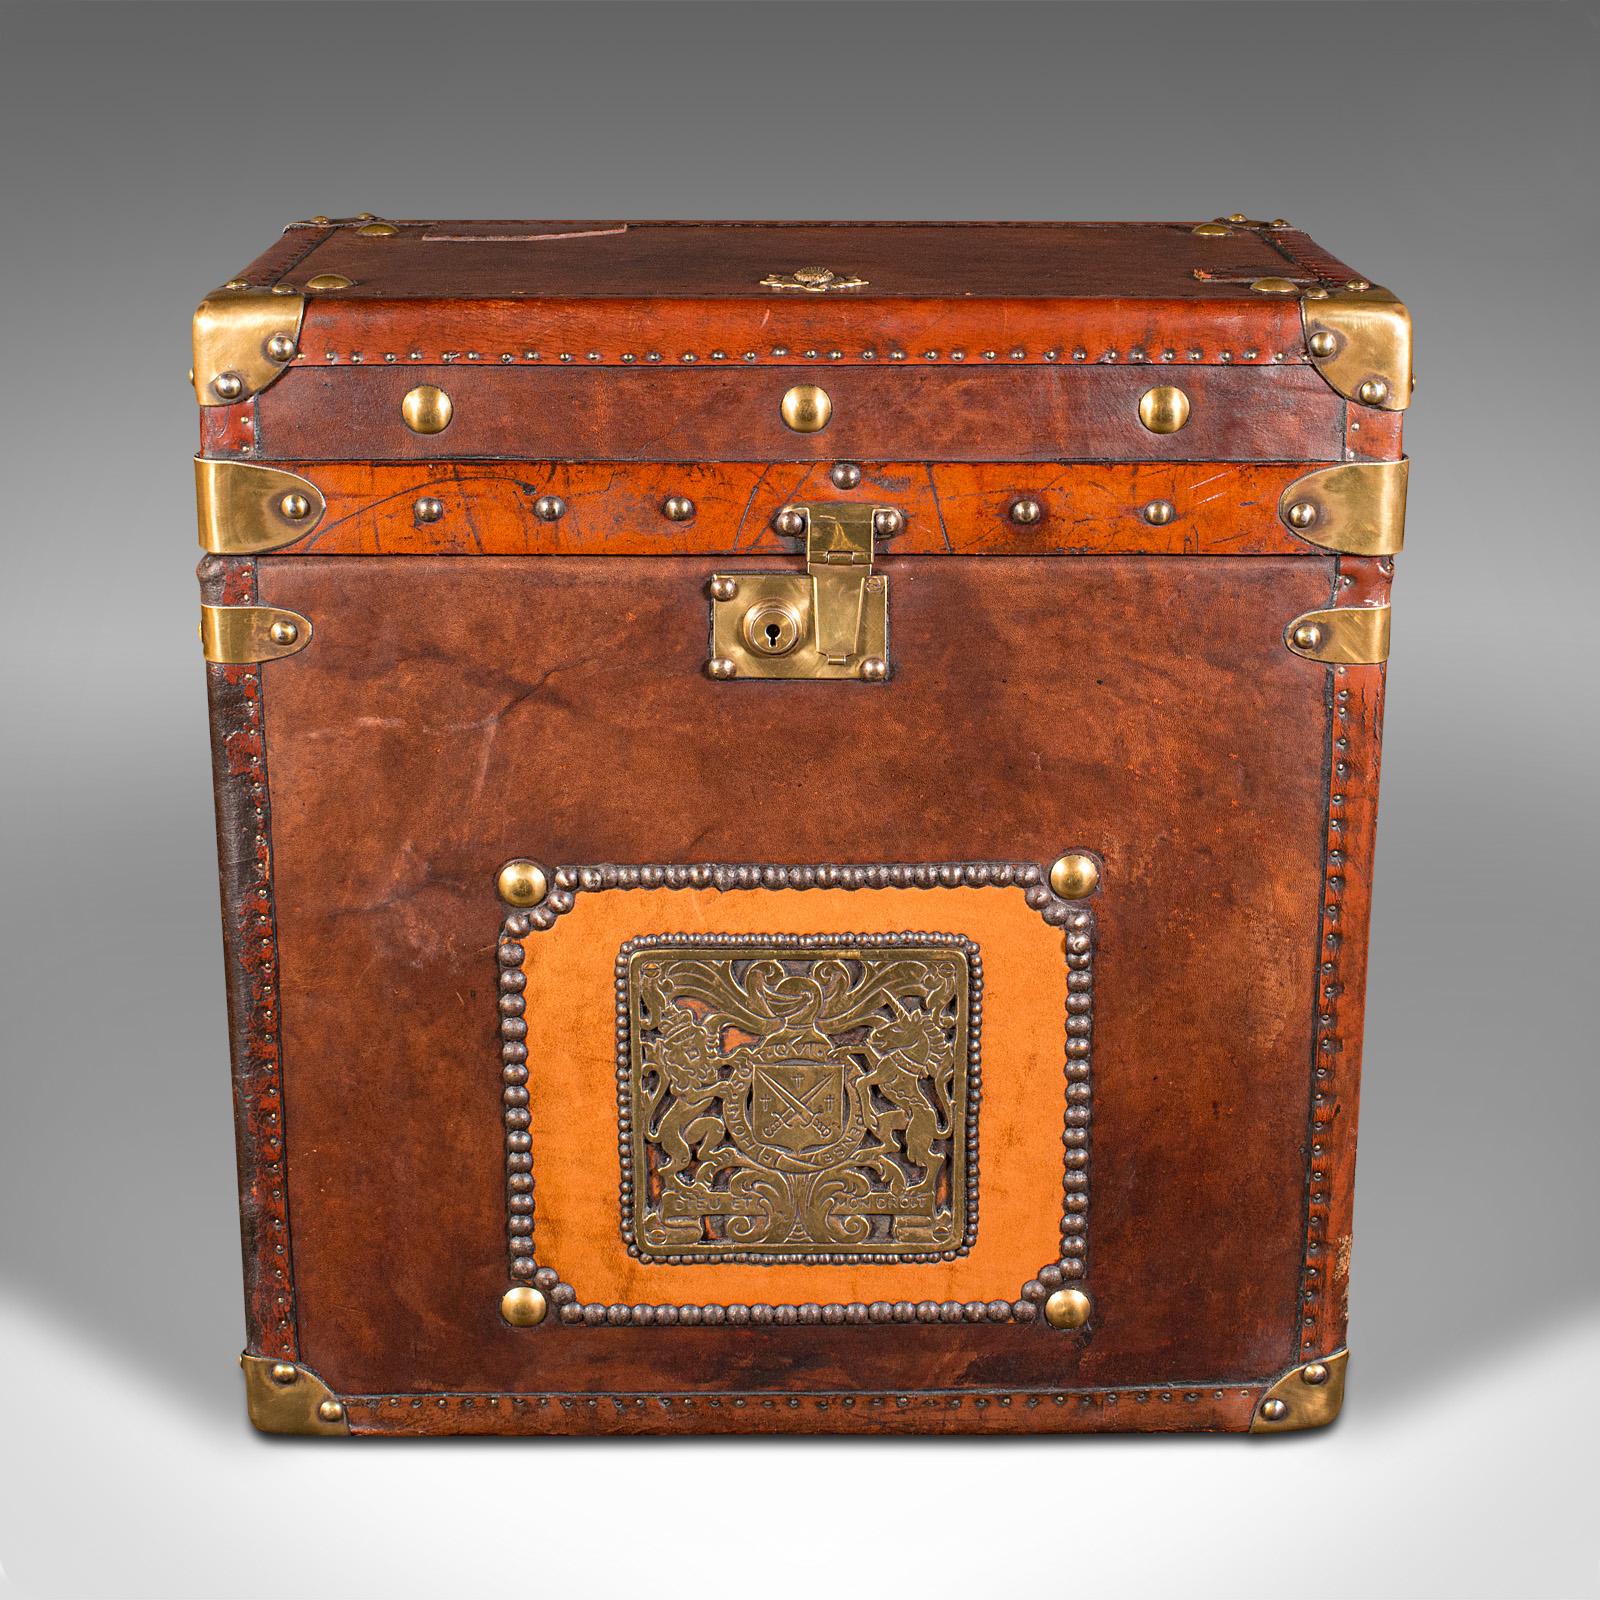 British Vintage Campaign Luggage Case, English, Leather, Brass, Nightstand, Circa 1960